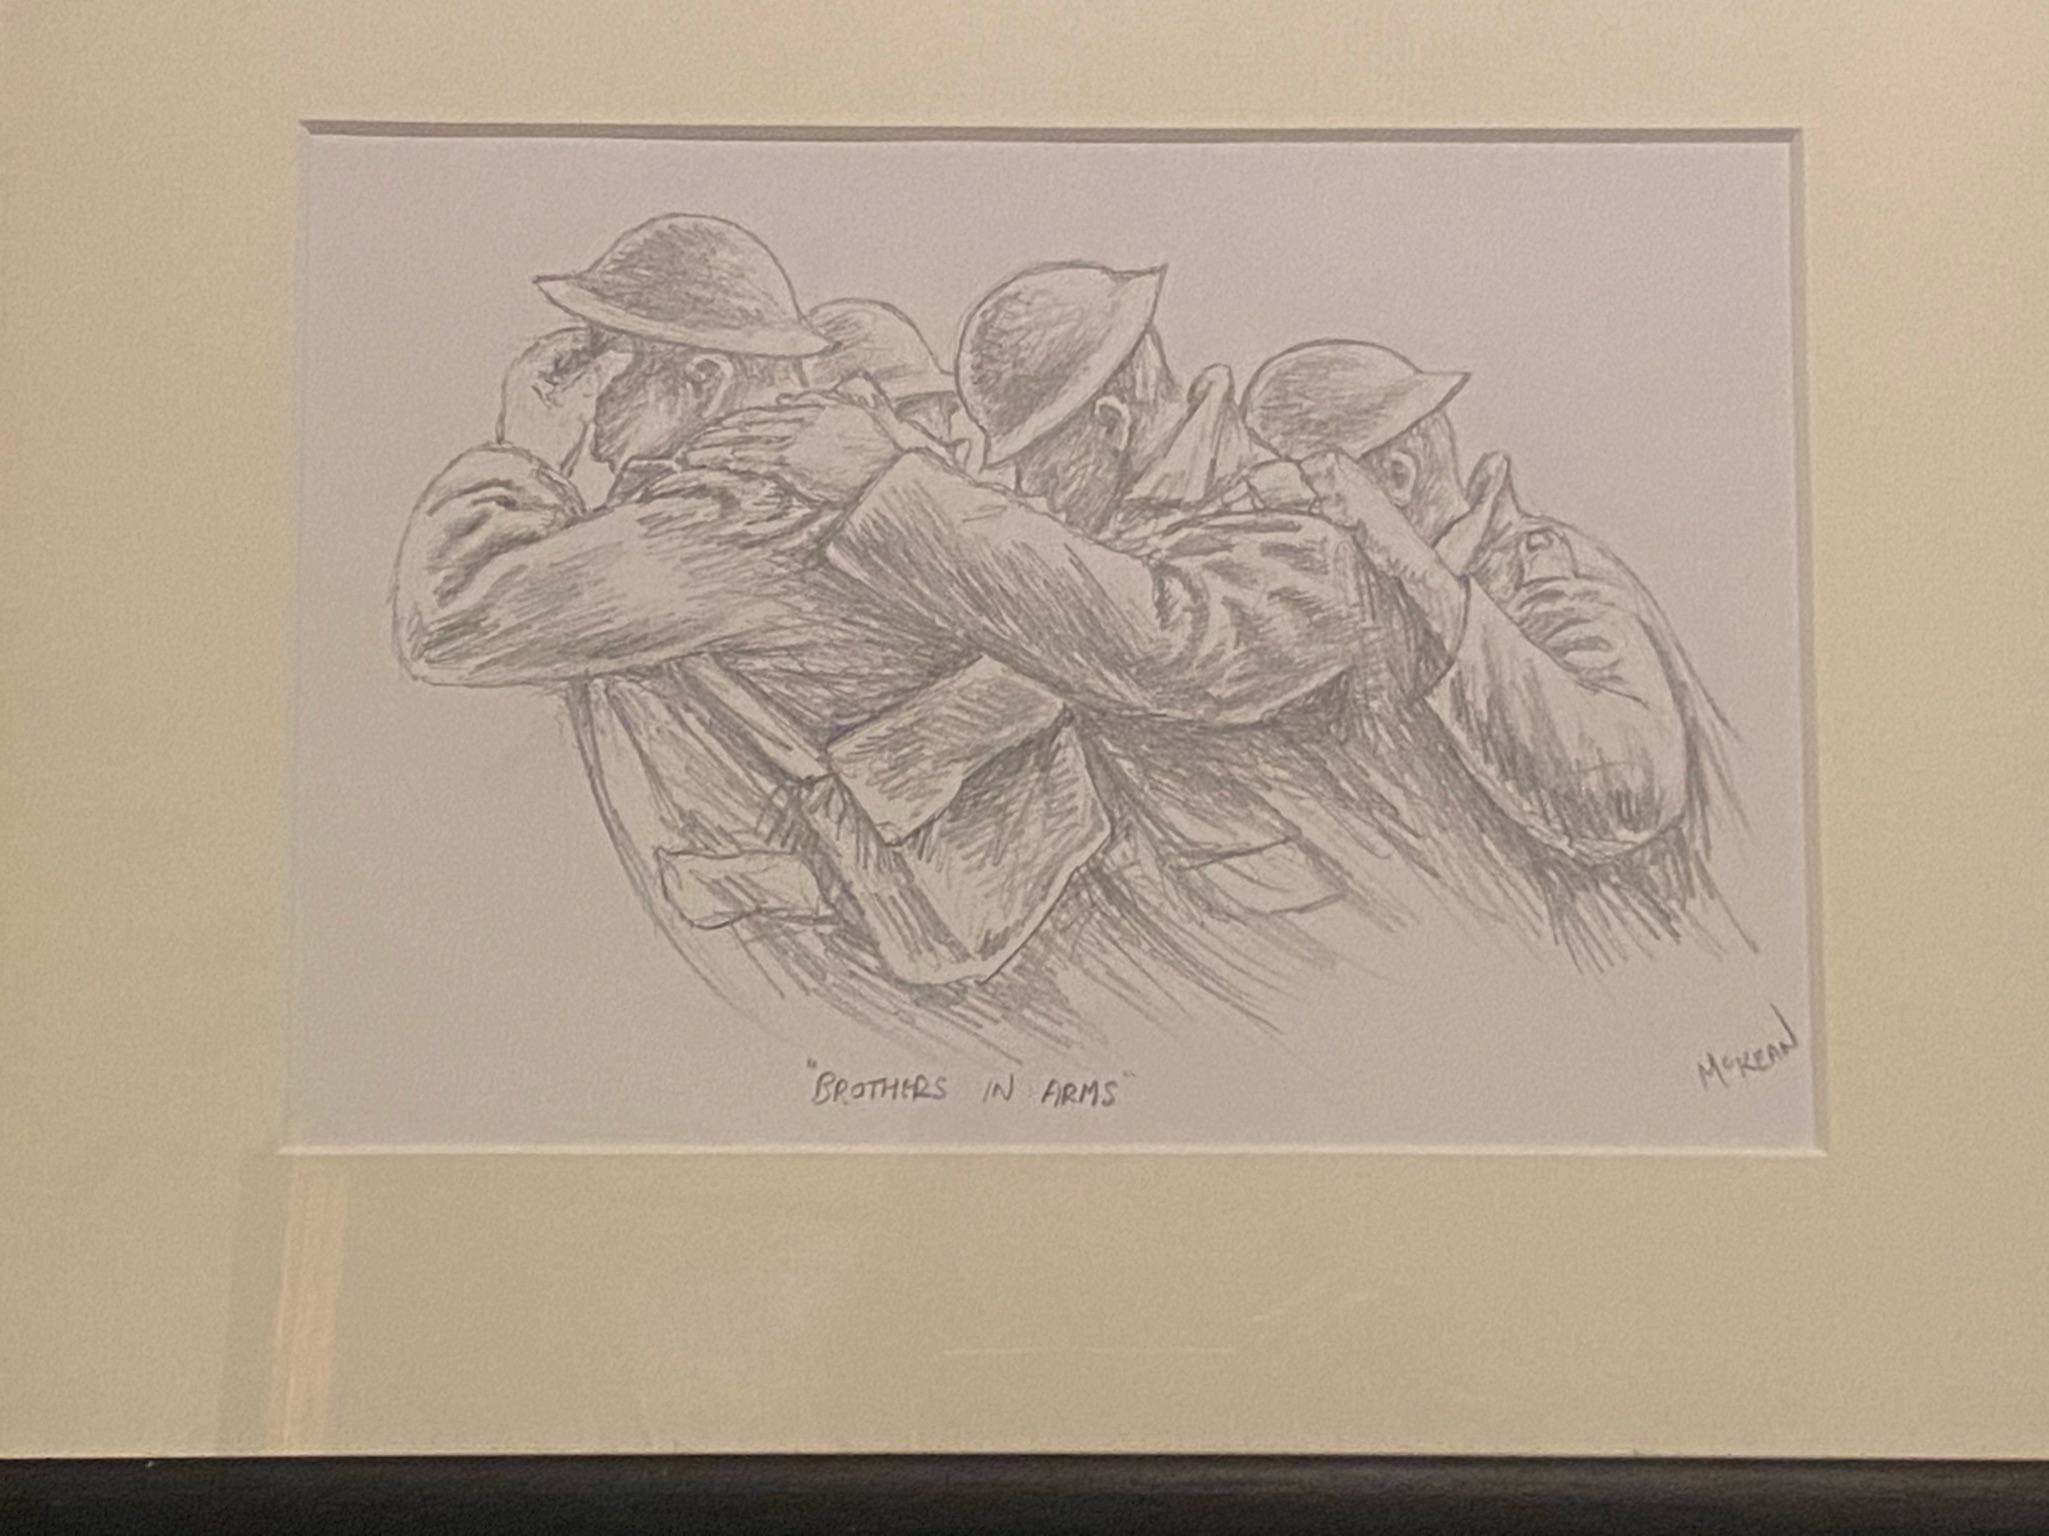 "Brothers in arms" Framed Signed Pencil drawing by Graham McKean - Image 5 of 5